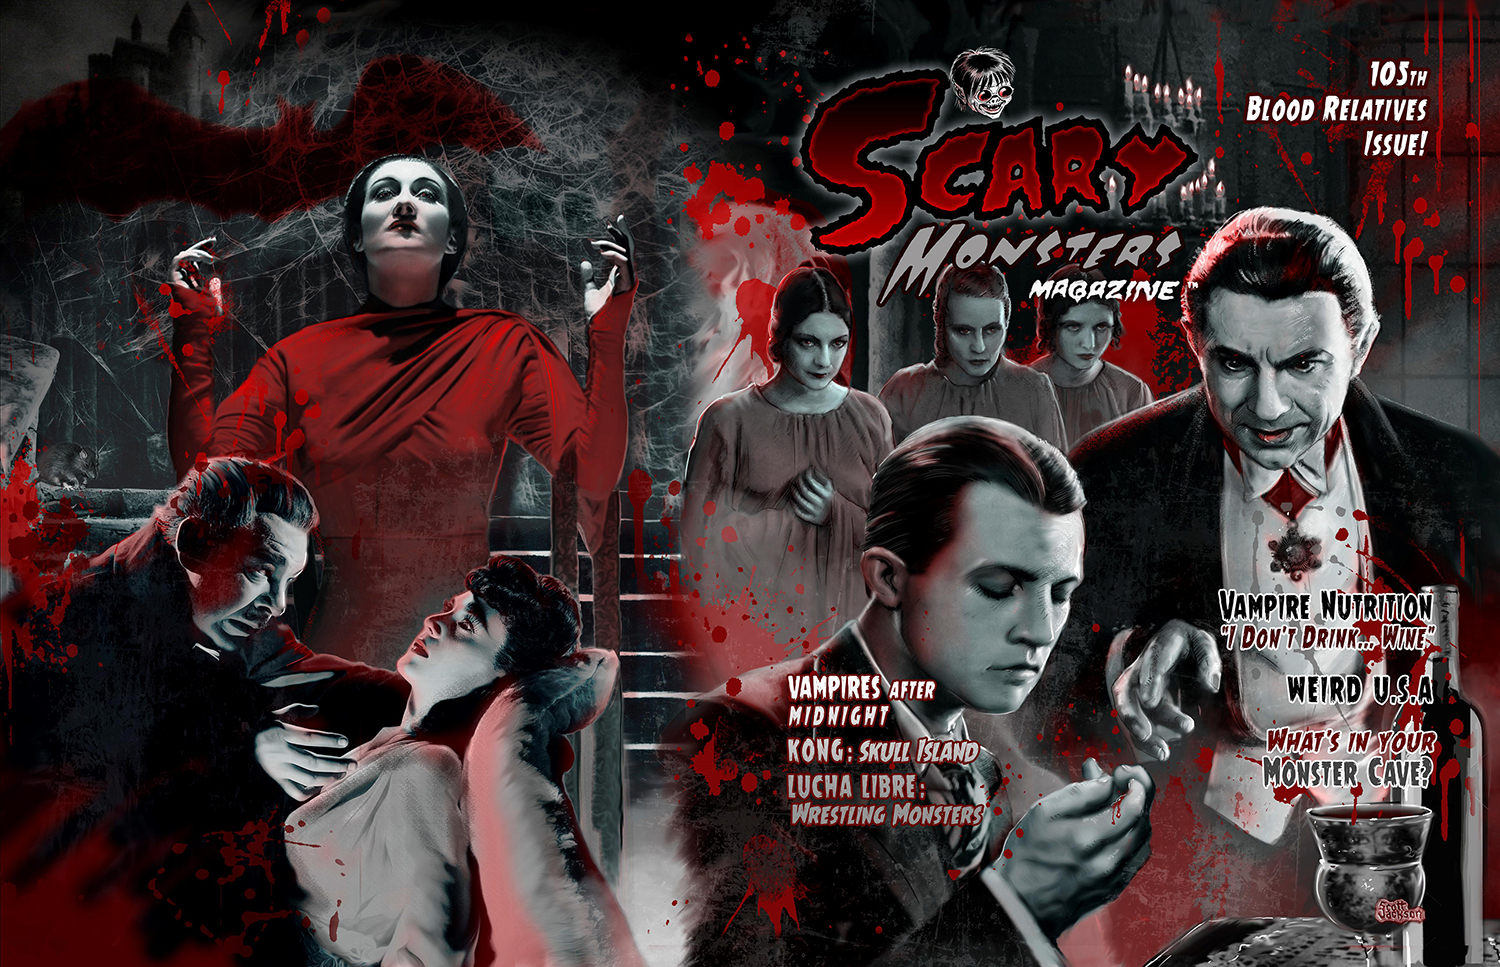 SCARY MONSTERS MAGAZINE #105